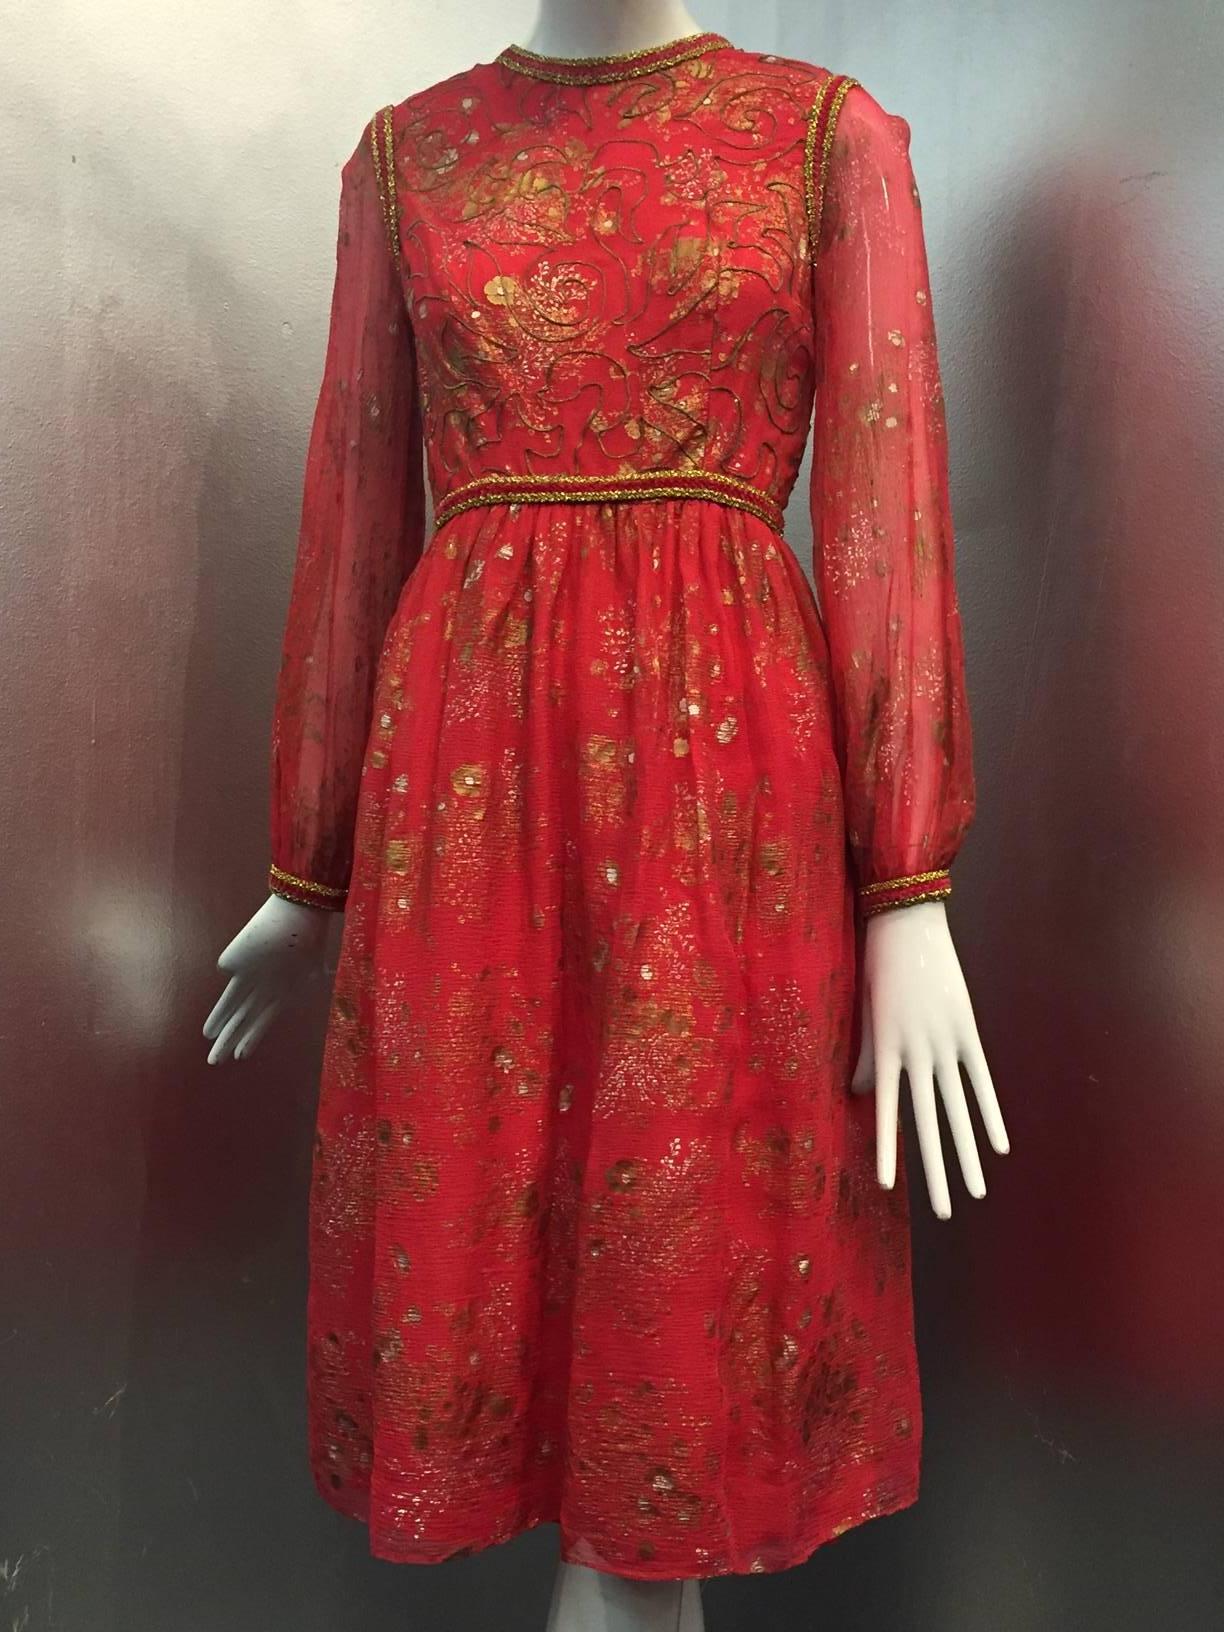 An early 1970s Oscar de La Renta red silk plisse peasant-inspired dress:  Plisse silk is stamped throughout with gold and silver floral sprays.  bodice is edged in gold and red chenille braid and covered in couch buillion cording. 